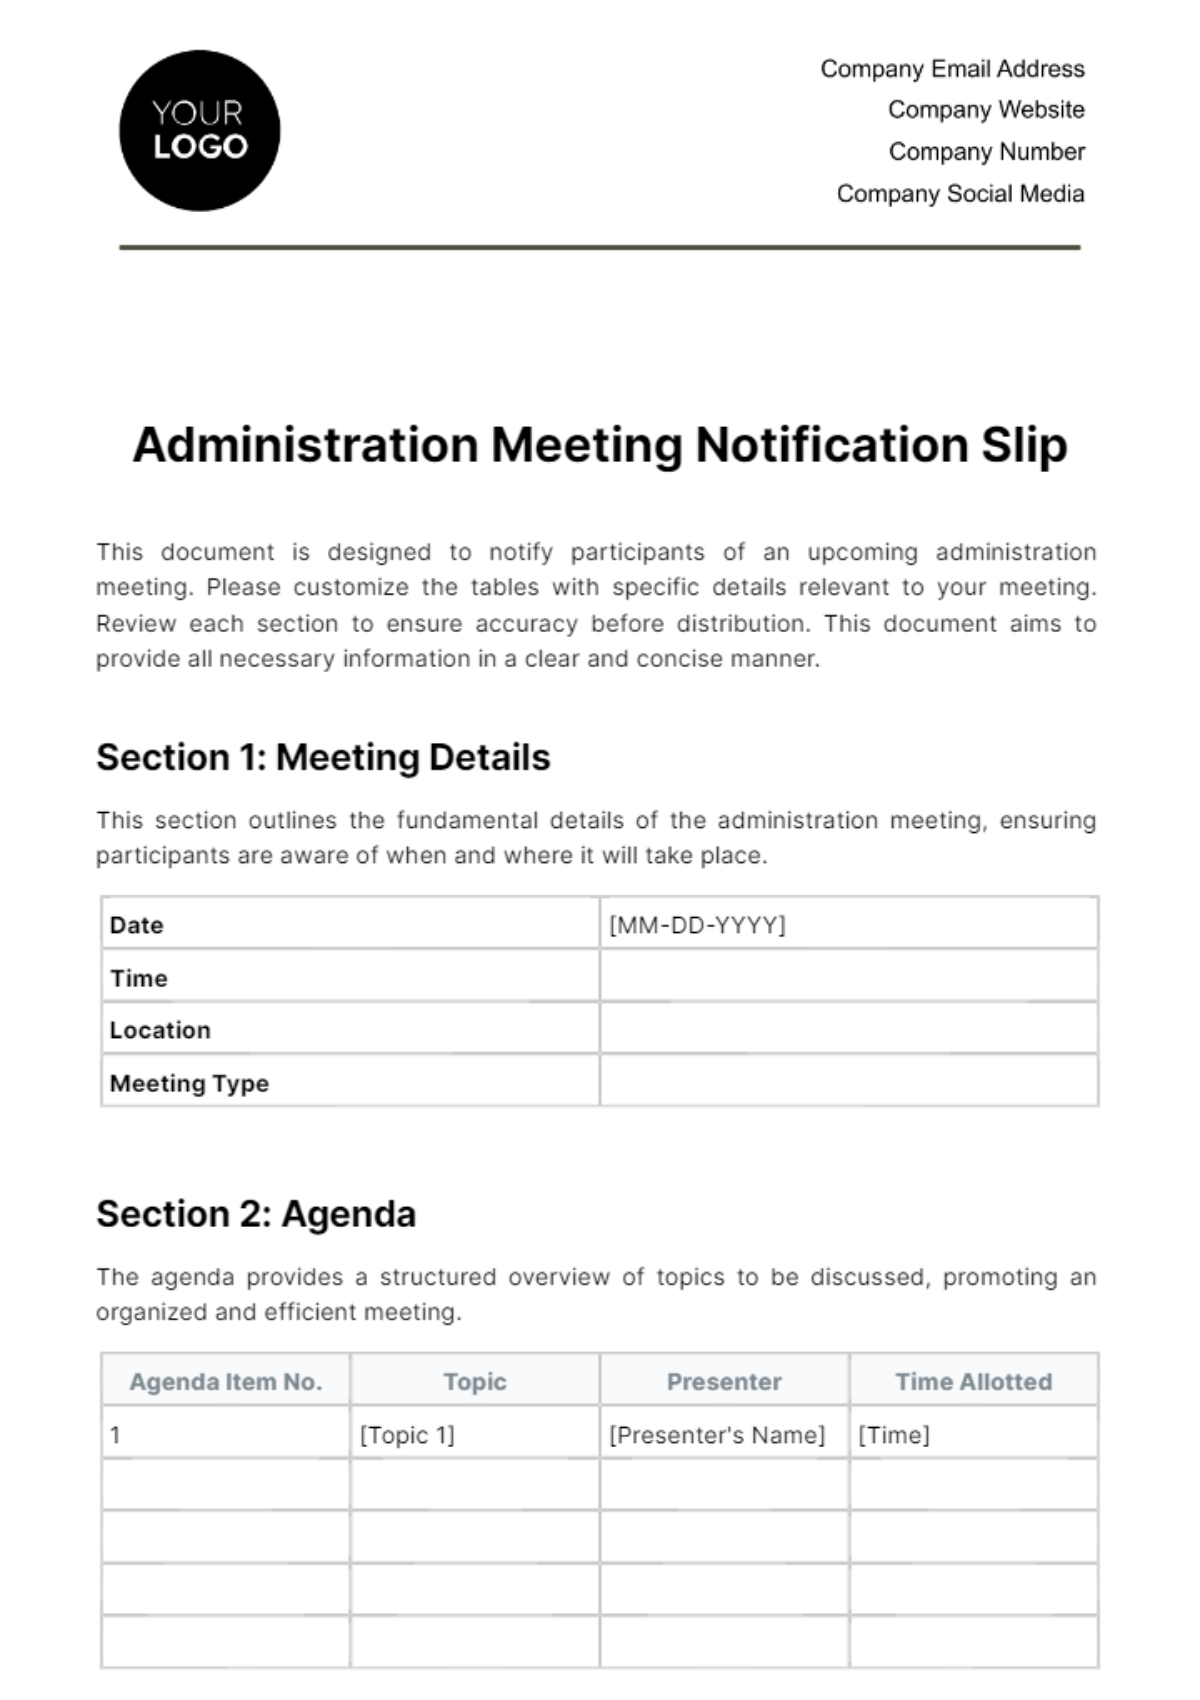 Administration Meeting Notification Slip Template